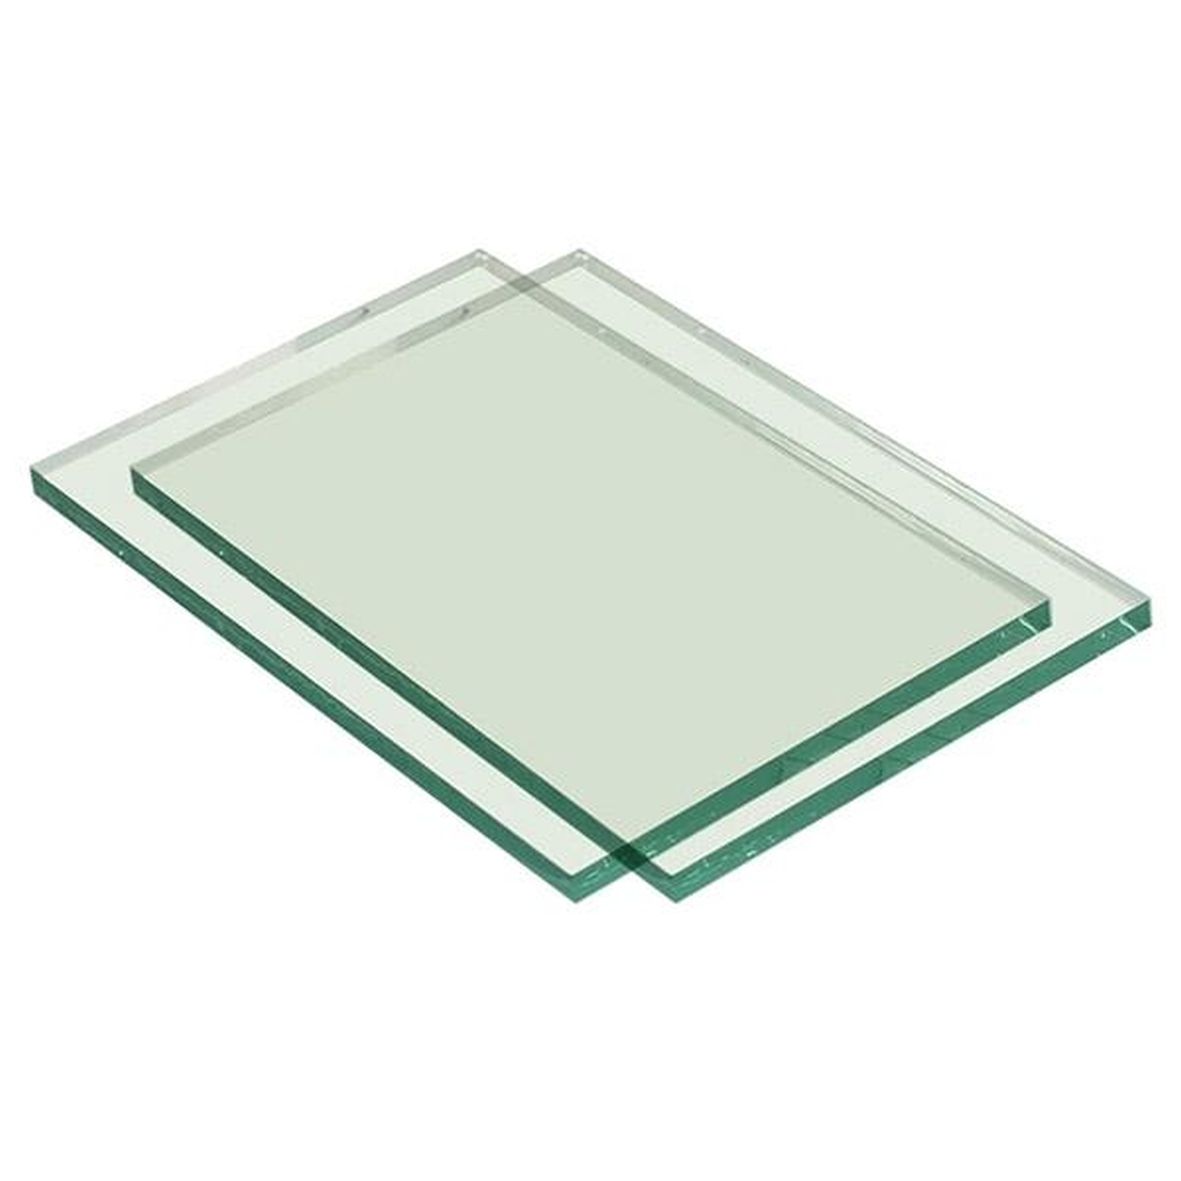 6mm CLEAR Toughened Glass